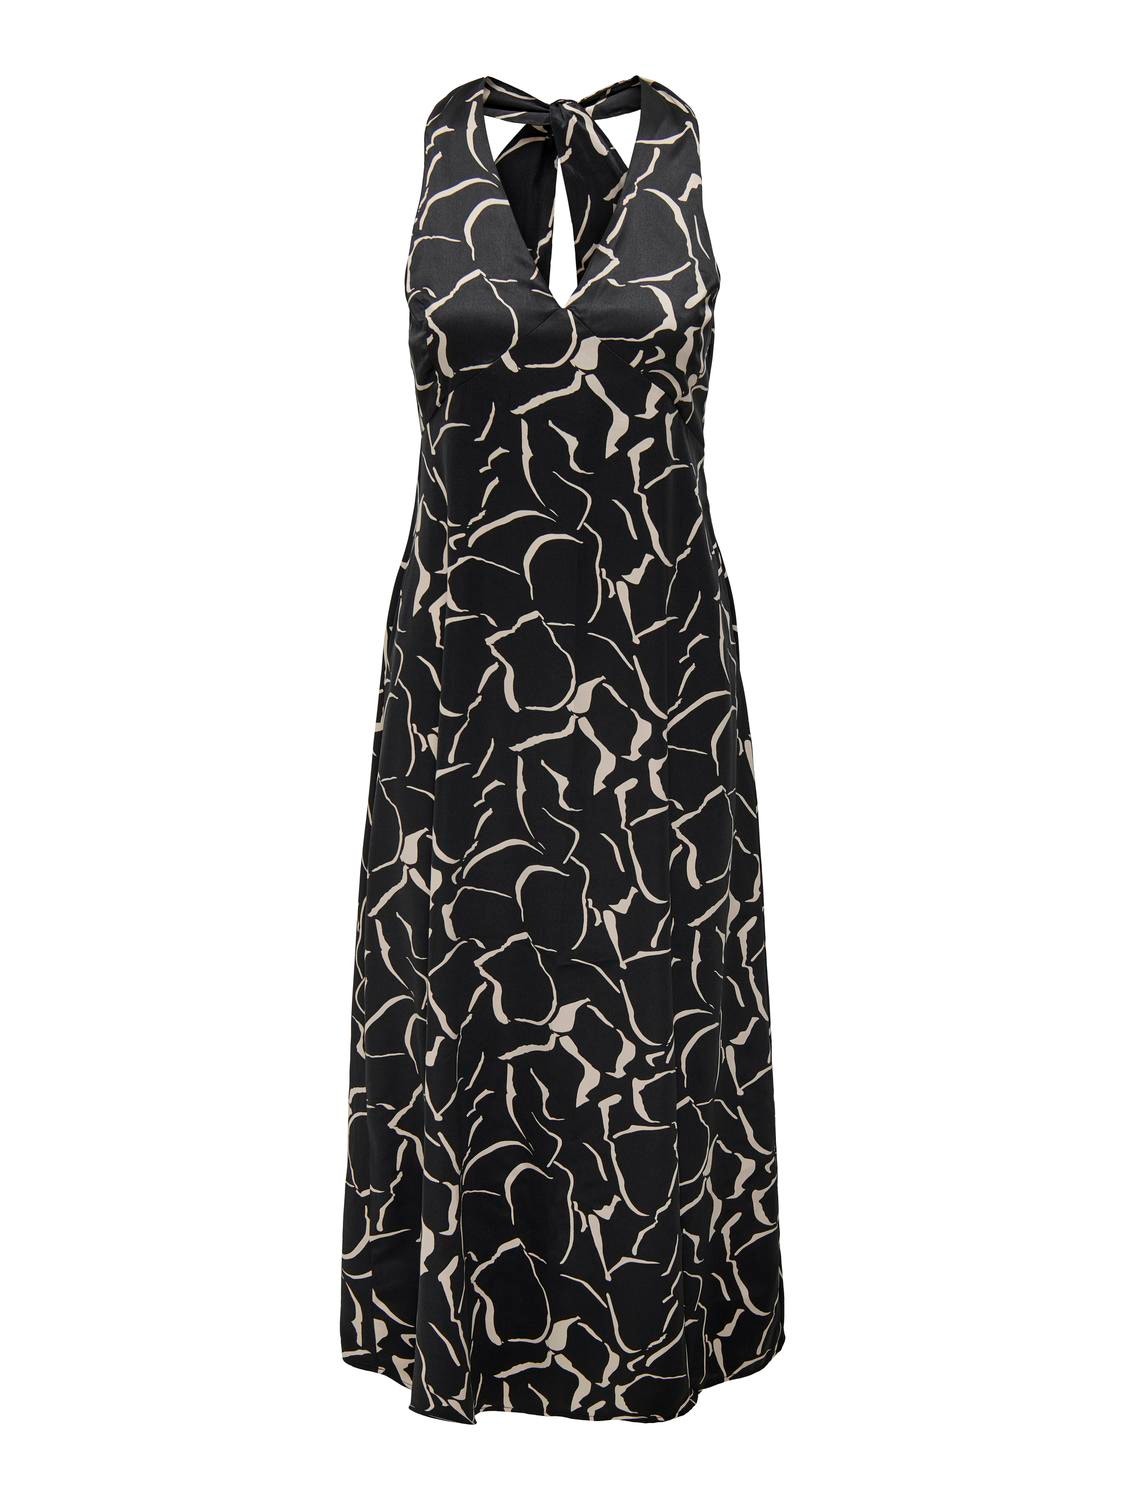 ONLY Maxi dress with v-neck -Black - 15318885